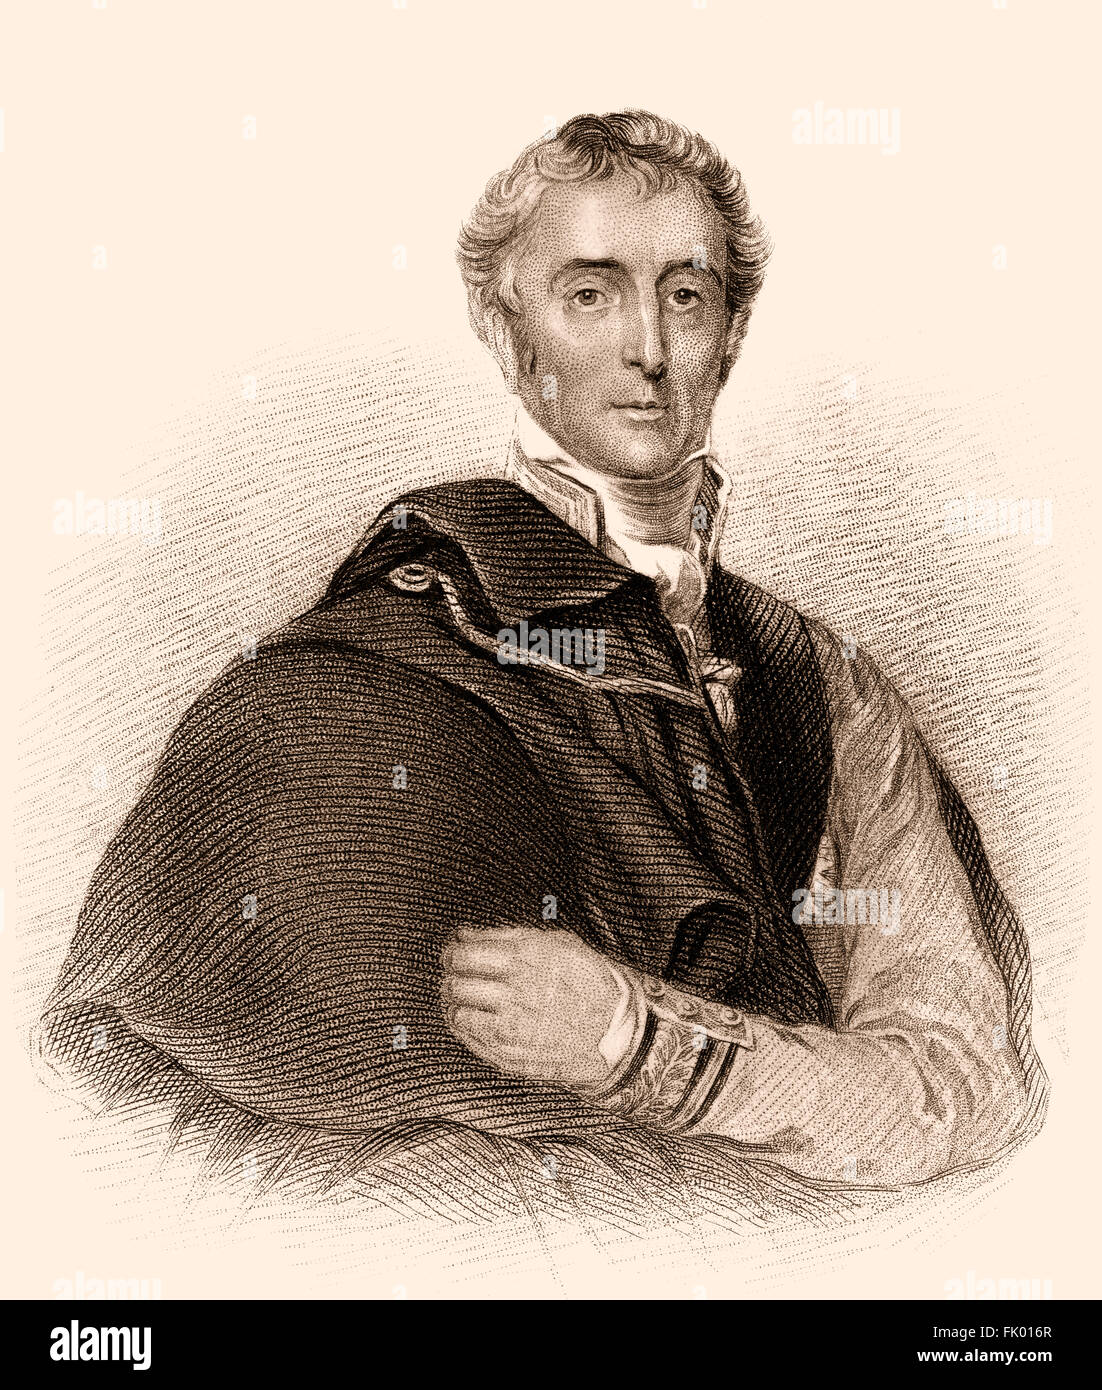 Arthur Wellesley, 1st Duke of Wellington, 1769-1852, field marshal and a  British military leader, foreign minister and prime min Stock Photo - Alamy